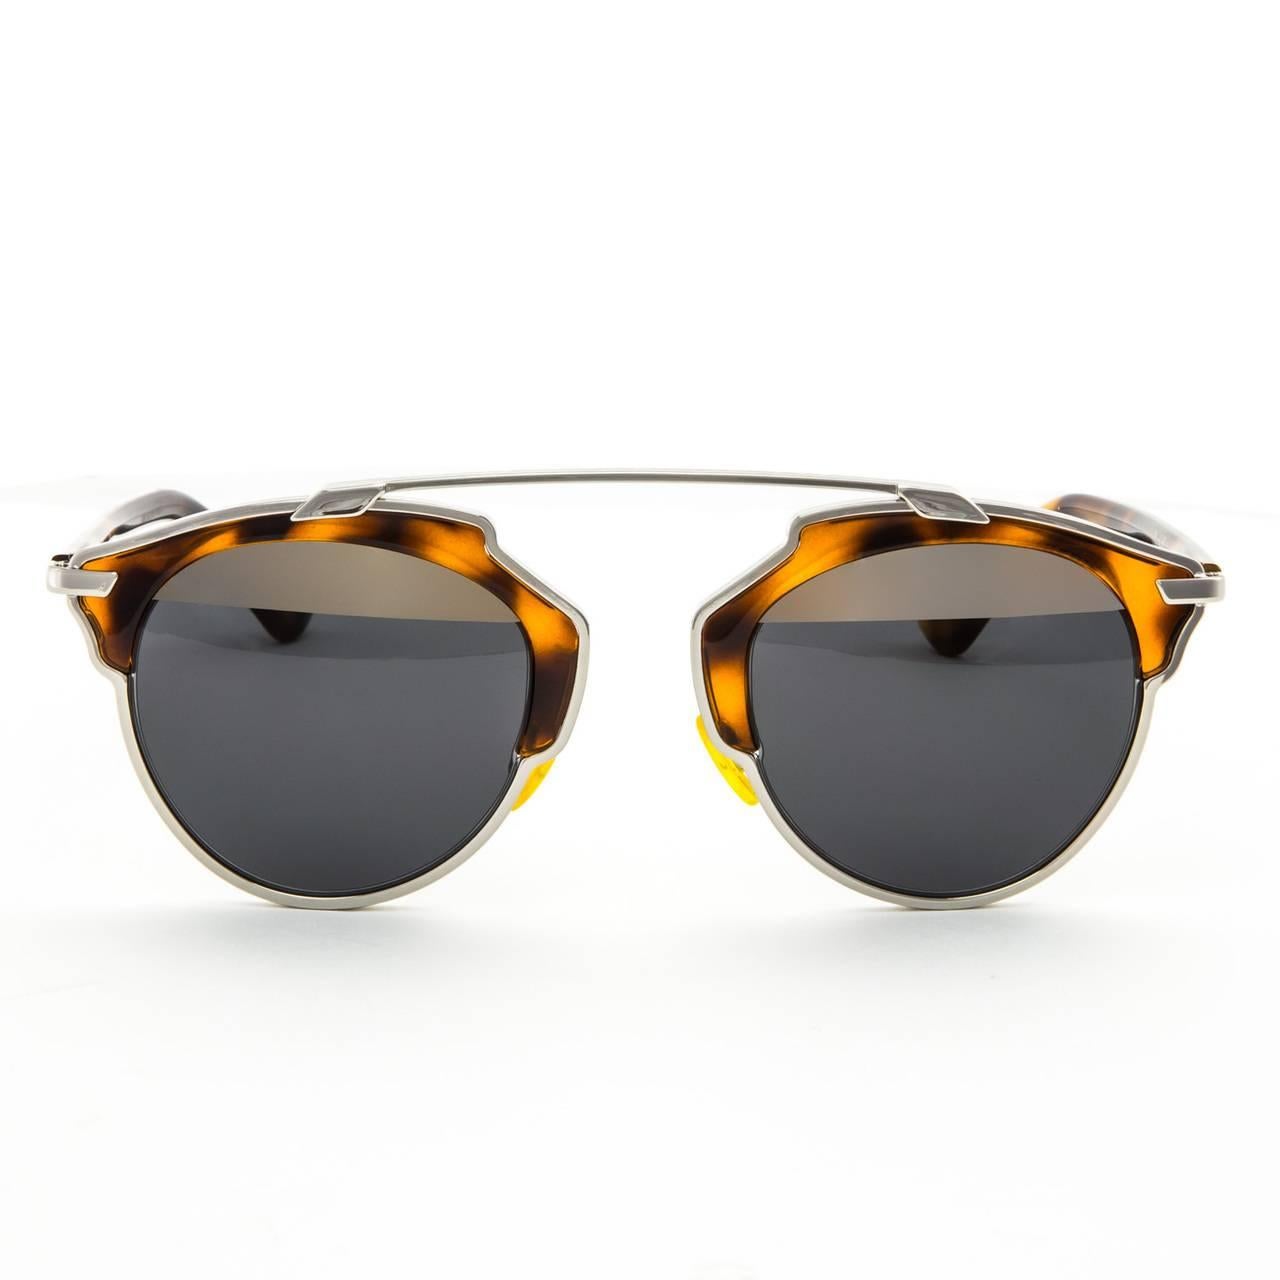 Dior So Real Sunglasses in Tortoise Shell with Silver Mirror Lenses

This tortoise shell color of the iconic Dior So Real sunglasses is instantly recognizable thanks to its unique split-color lenses. The top half features a silver mirror, with the